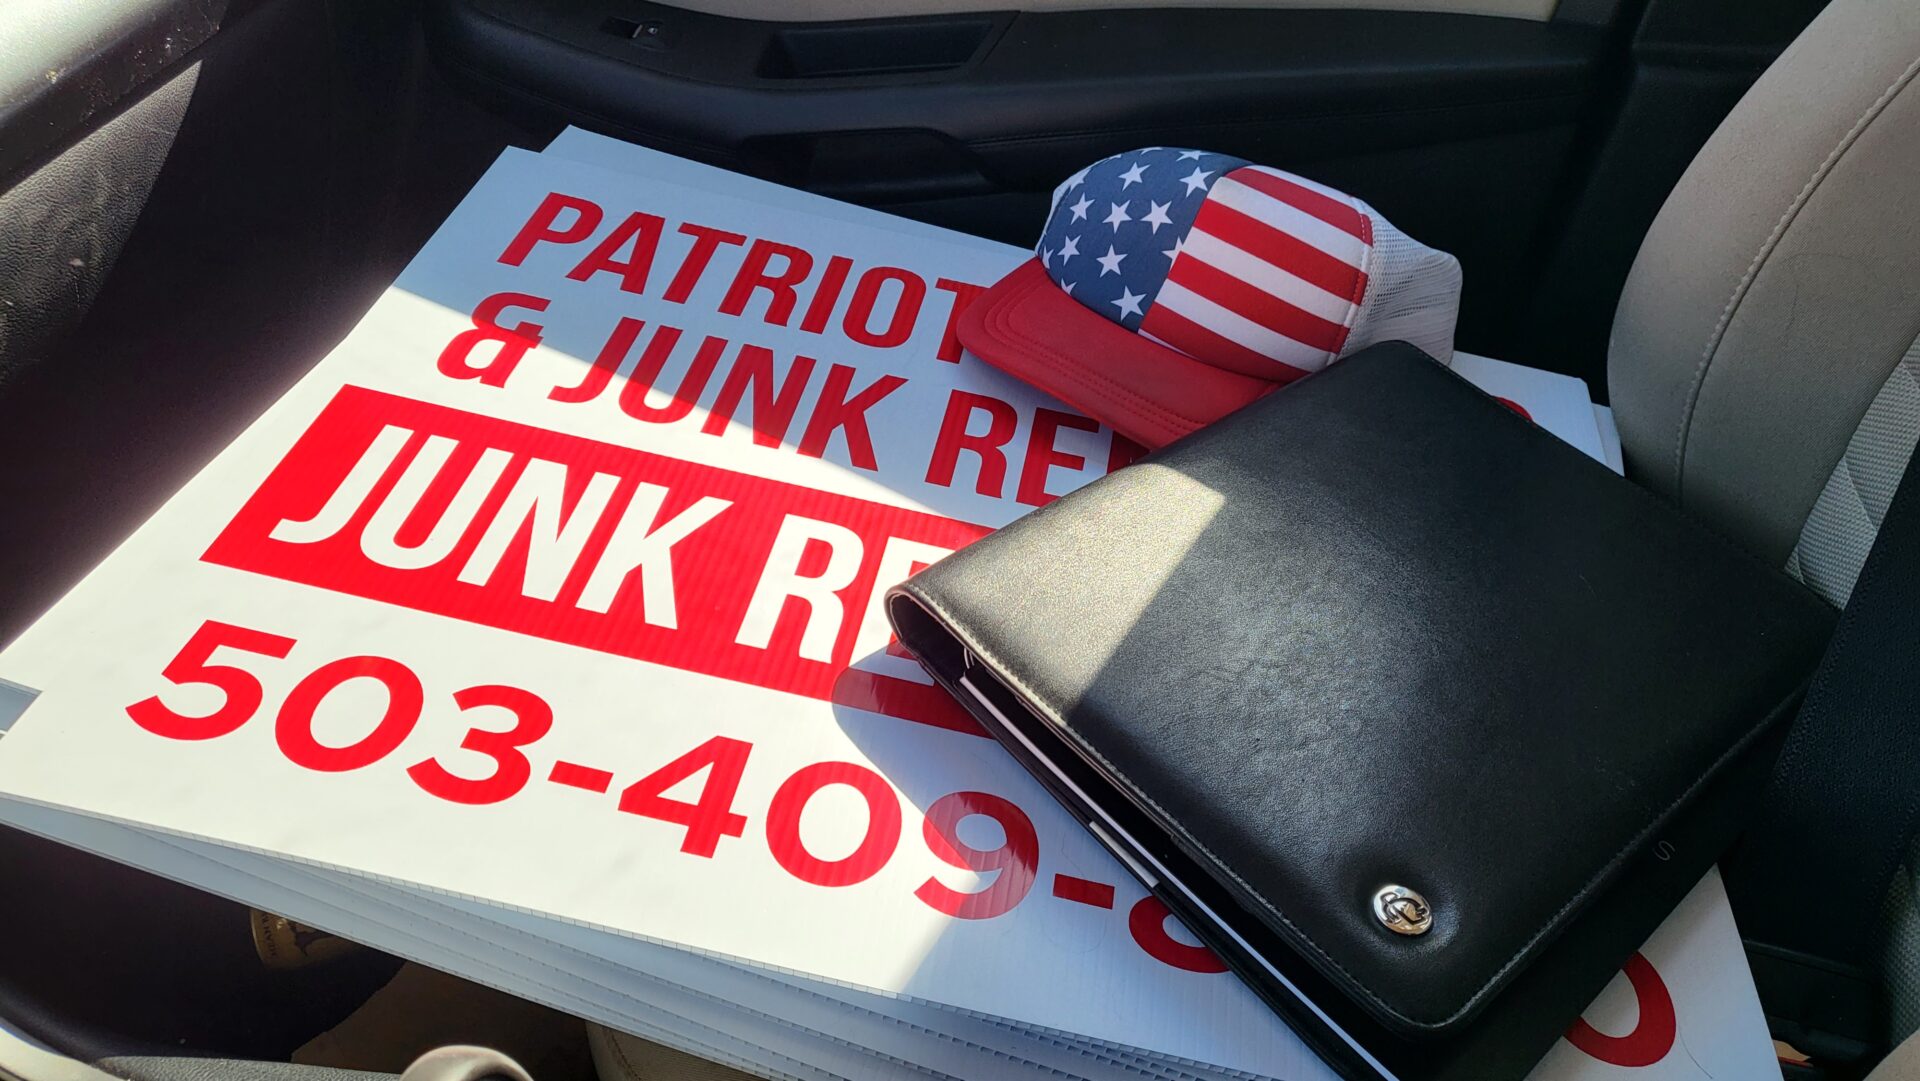 Call Patriot Hauling & Junk Removal Today.